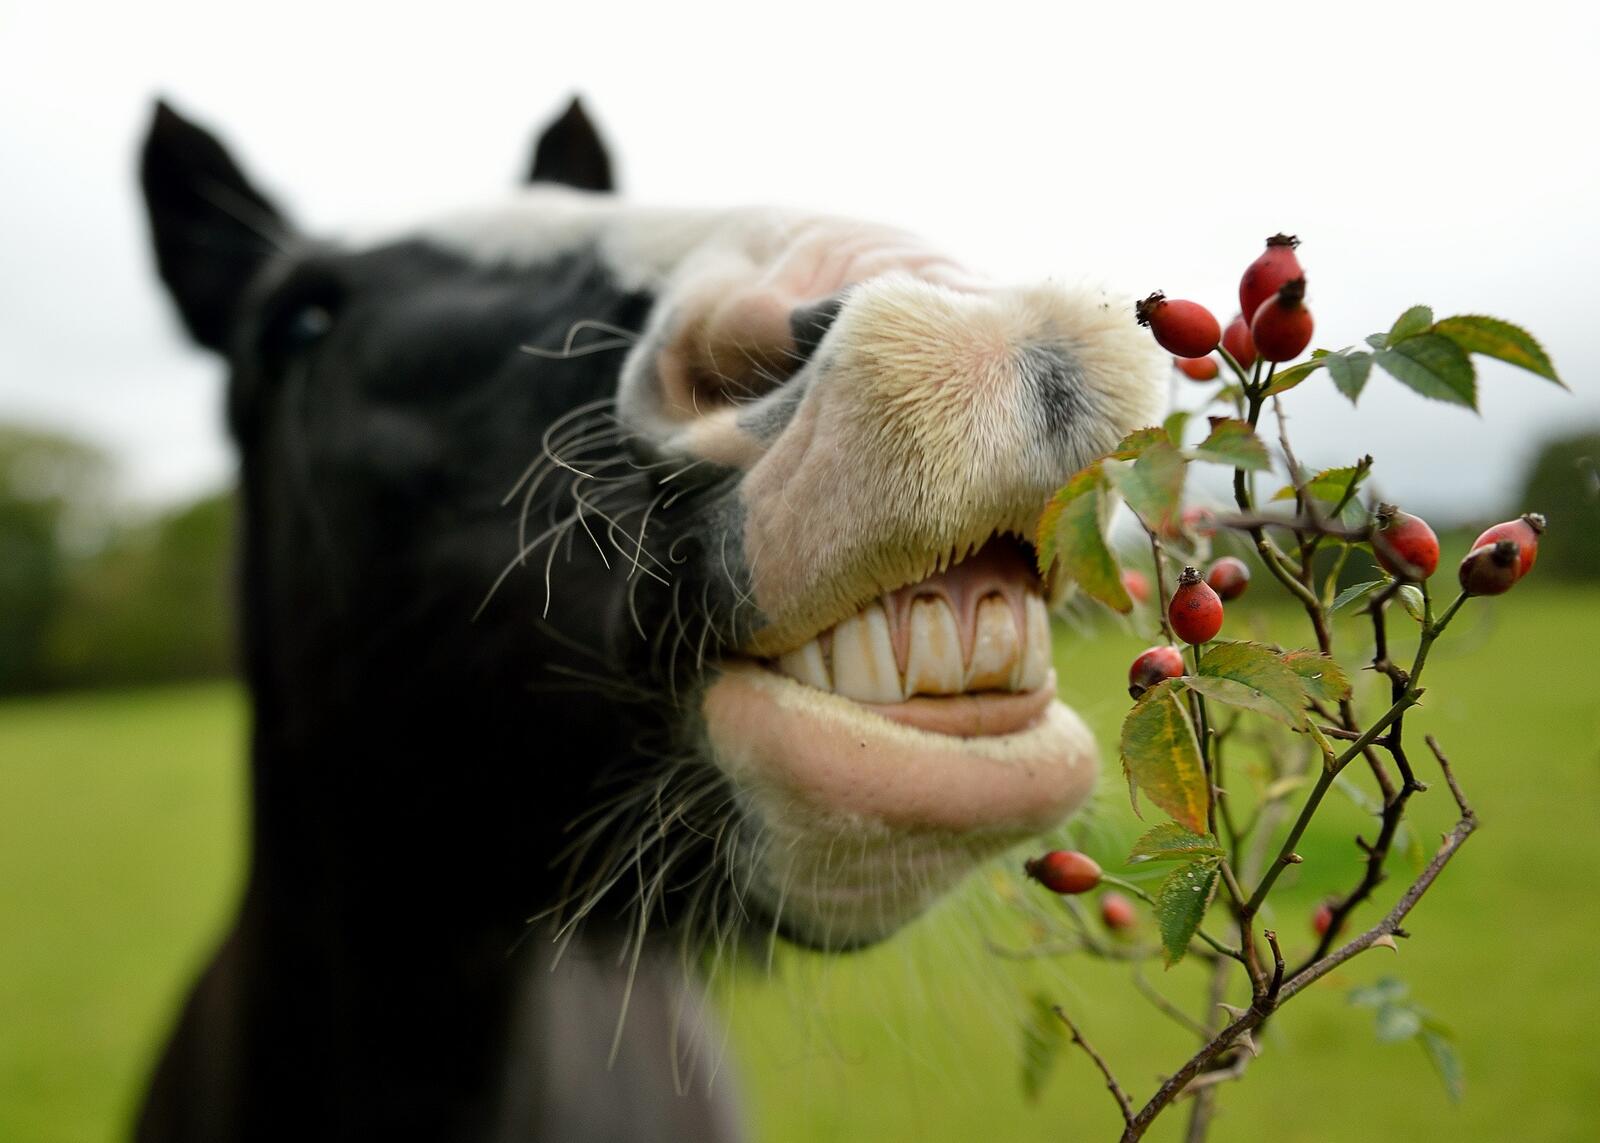 Free photo A horse sniffing berries on a branch.